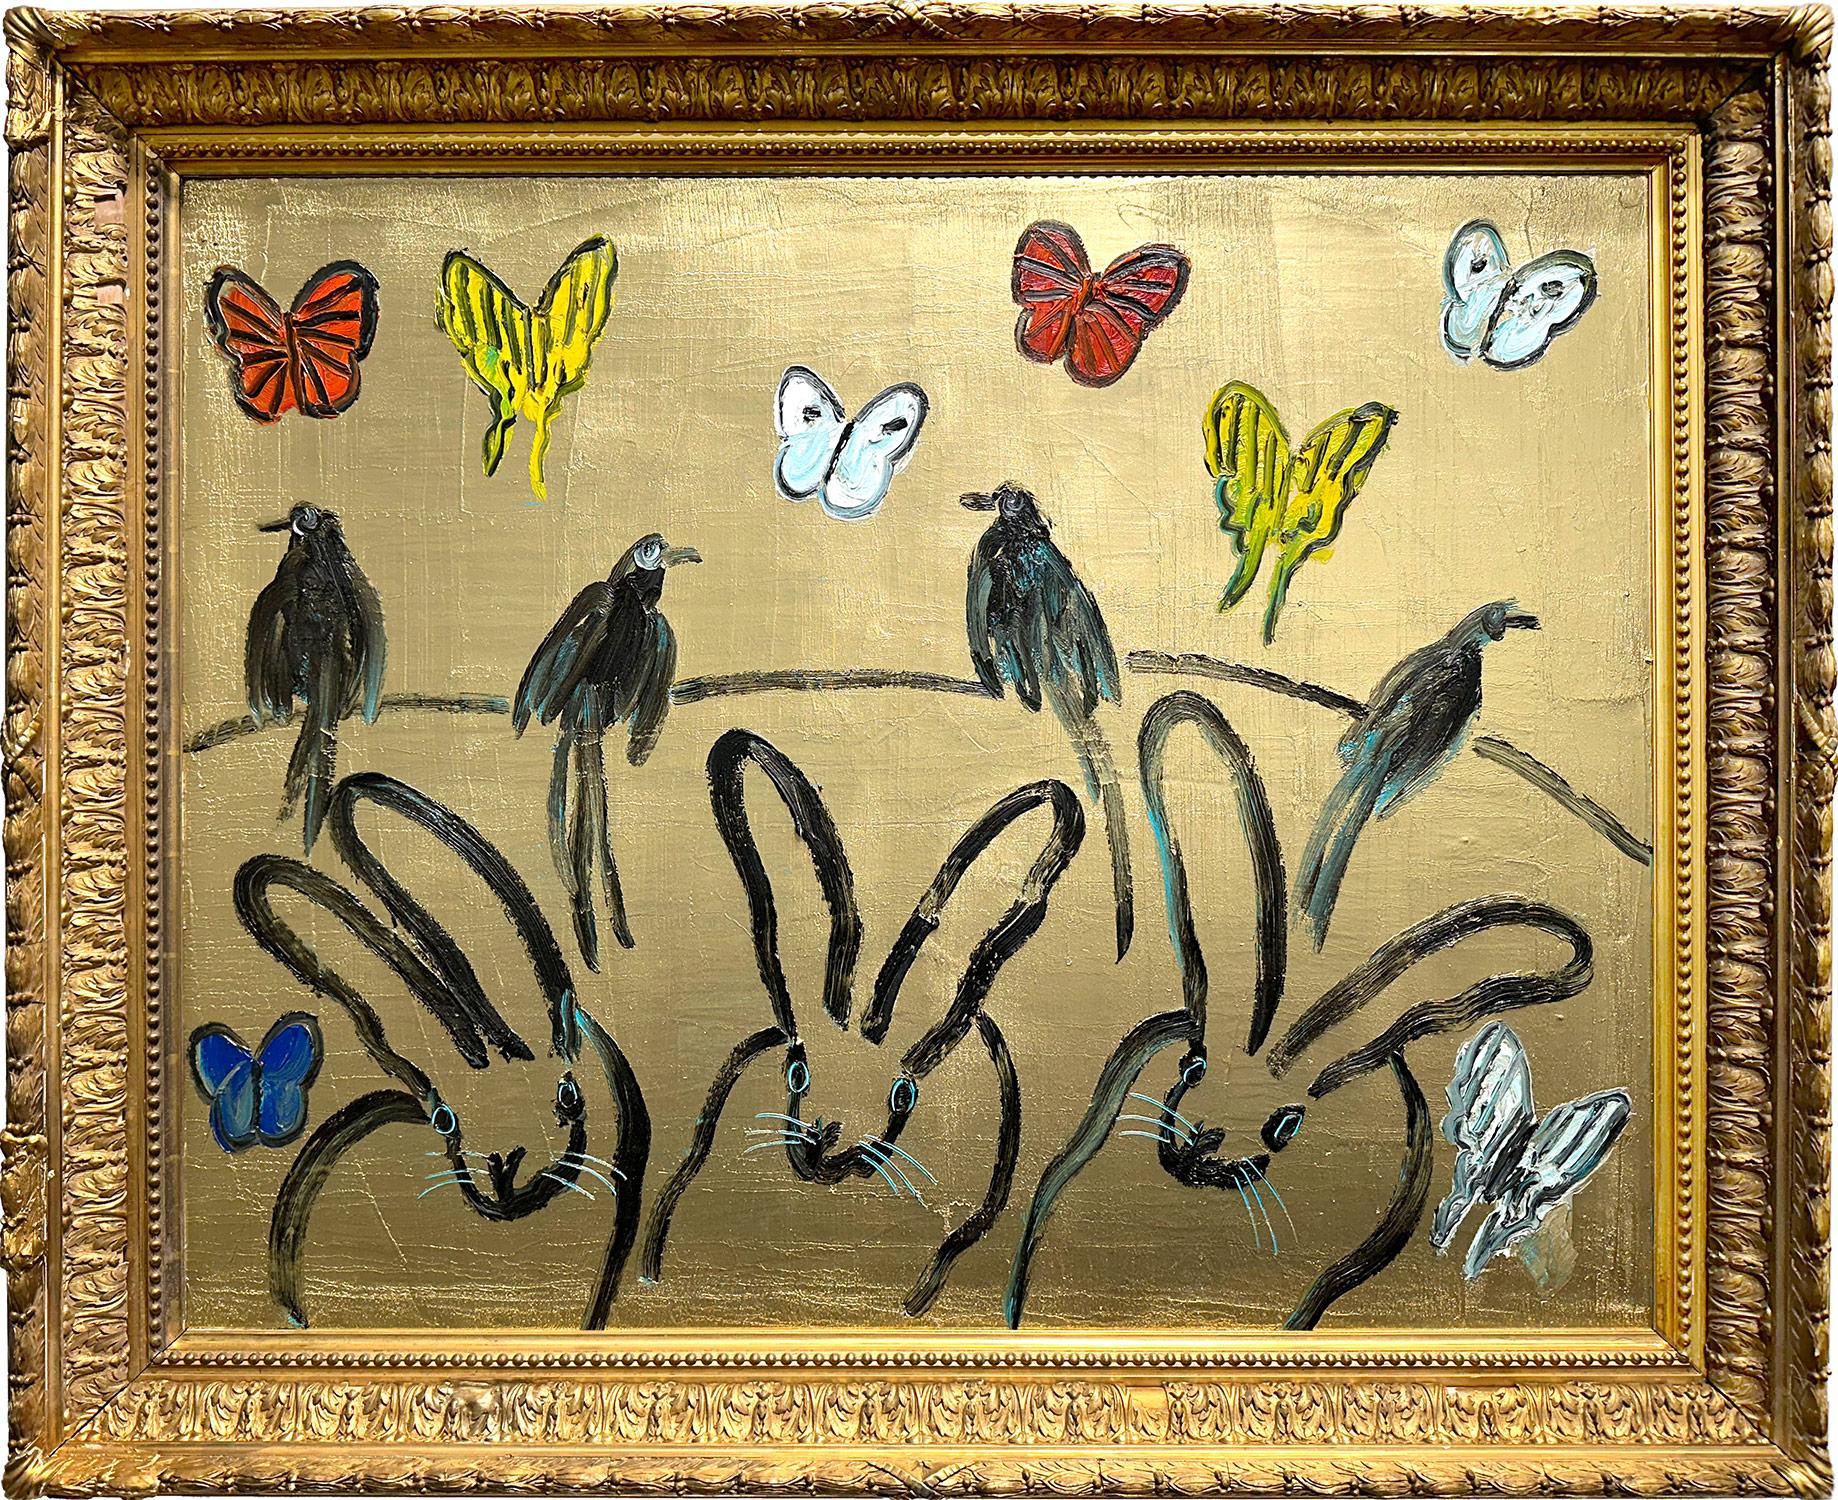 Hunt Slonem Abstract Painting - "Whydahs Longtail" Bunnies, Birds & Butterflies on Gold Background Oil Painting